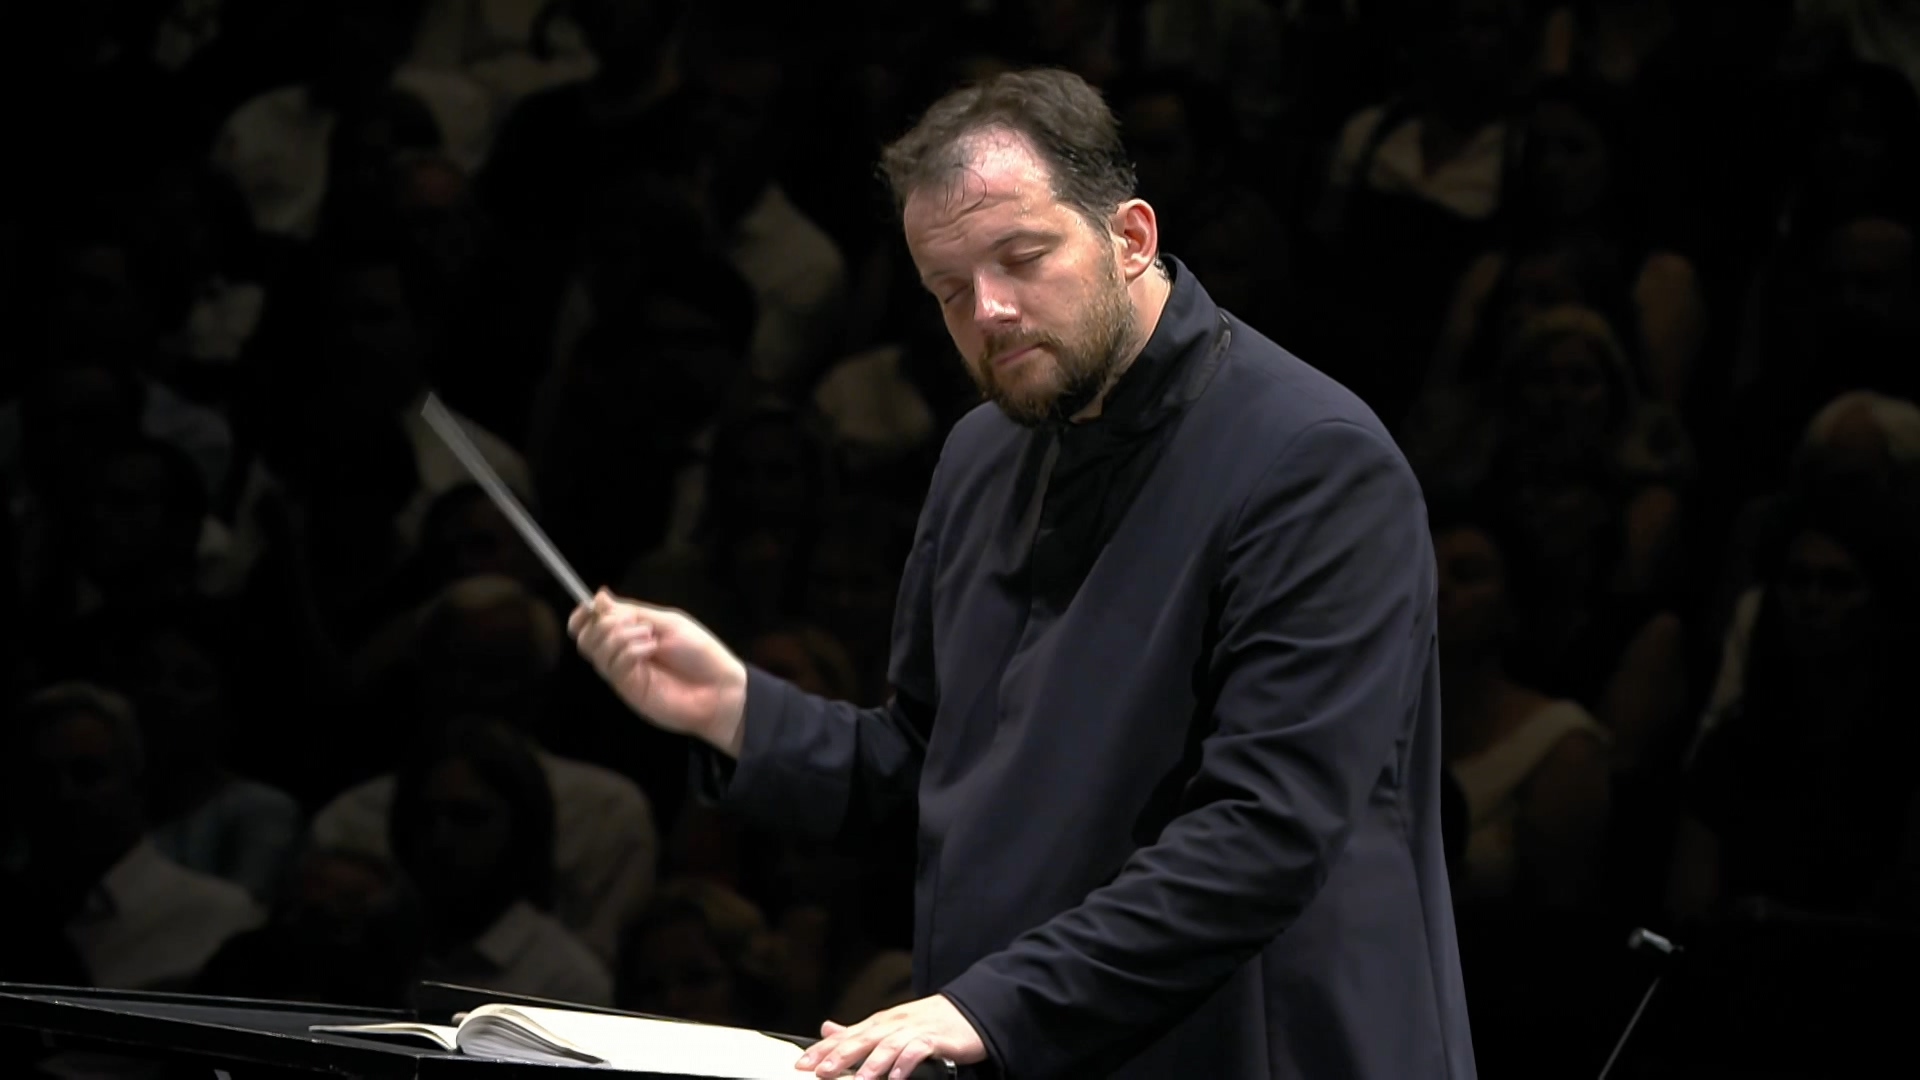 Nelsons.Conducts.The.Wiener.Philharmoniker.2018.COMPLETE.MBLURAY-MBLURAYFANS_20190707_162328.835.jpg